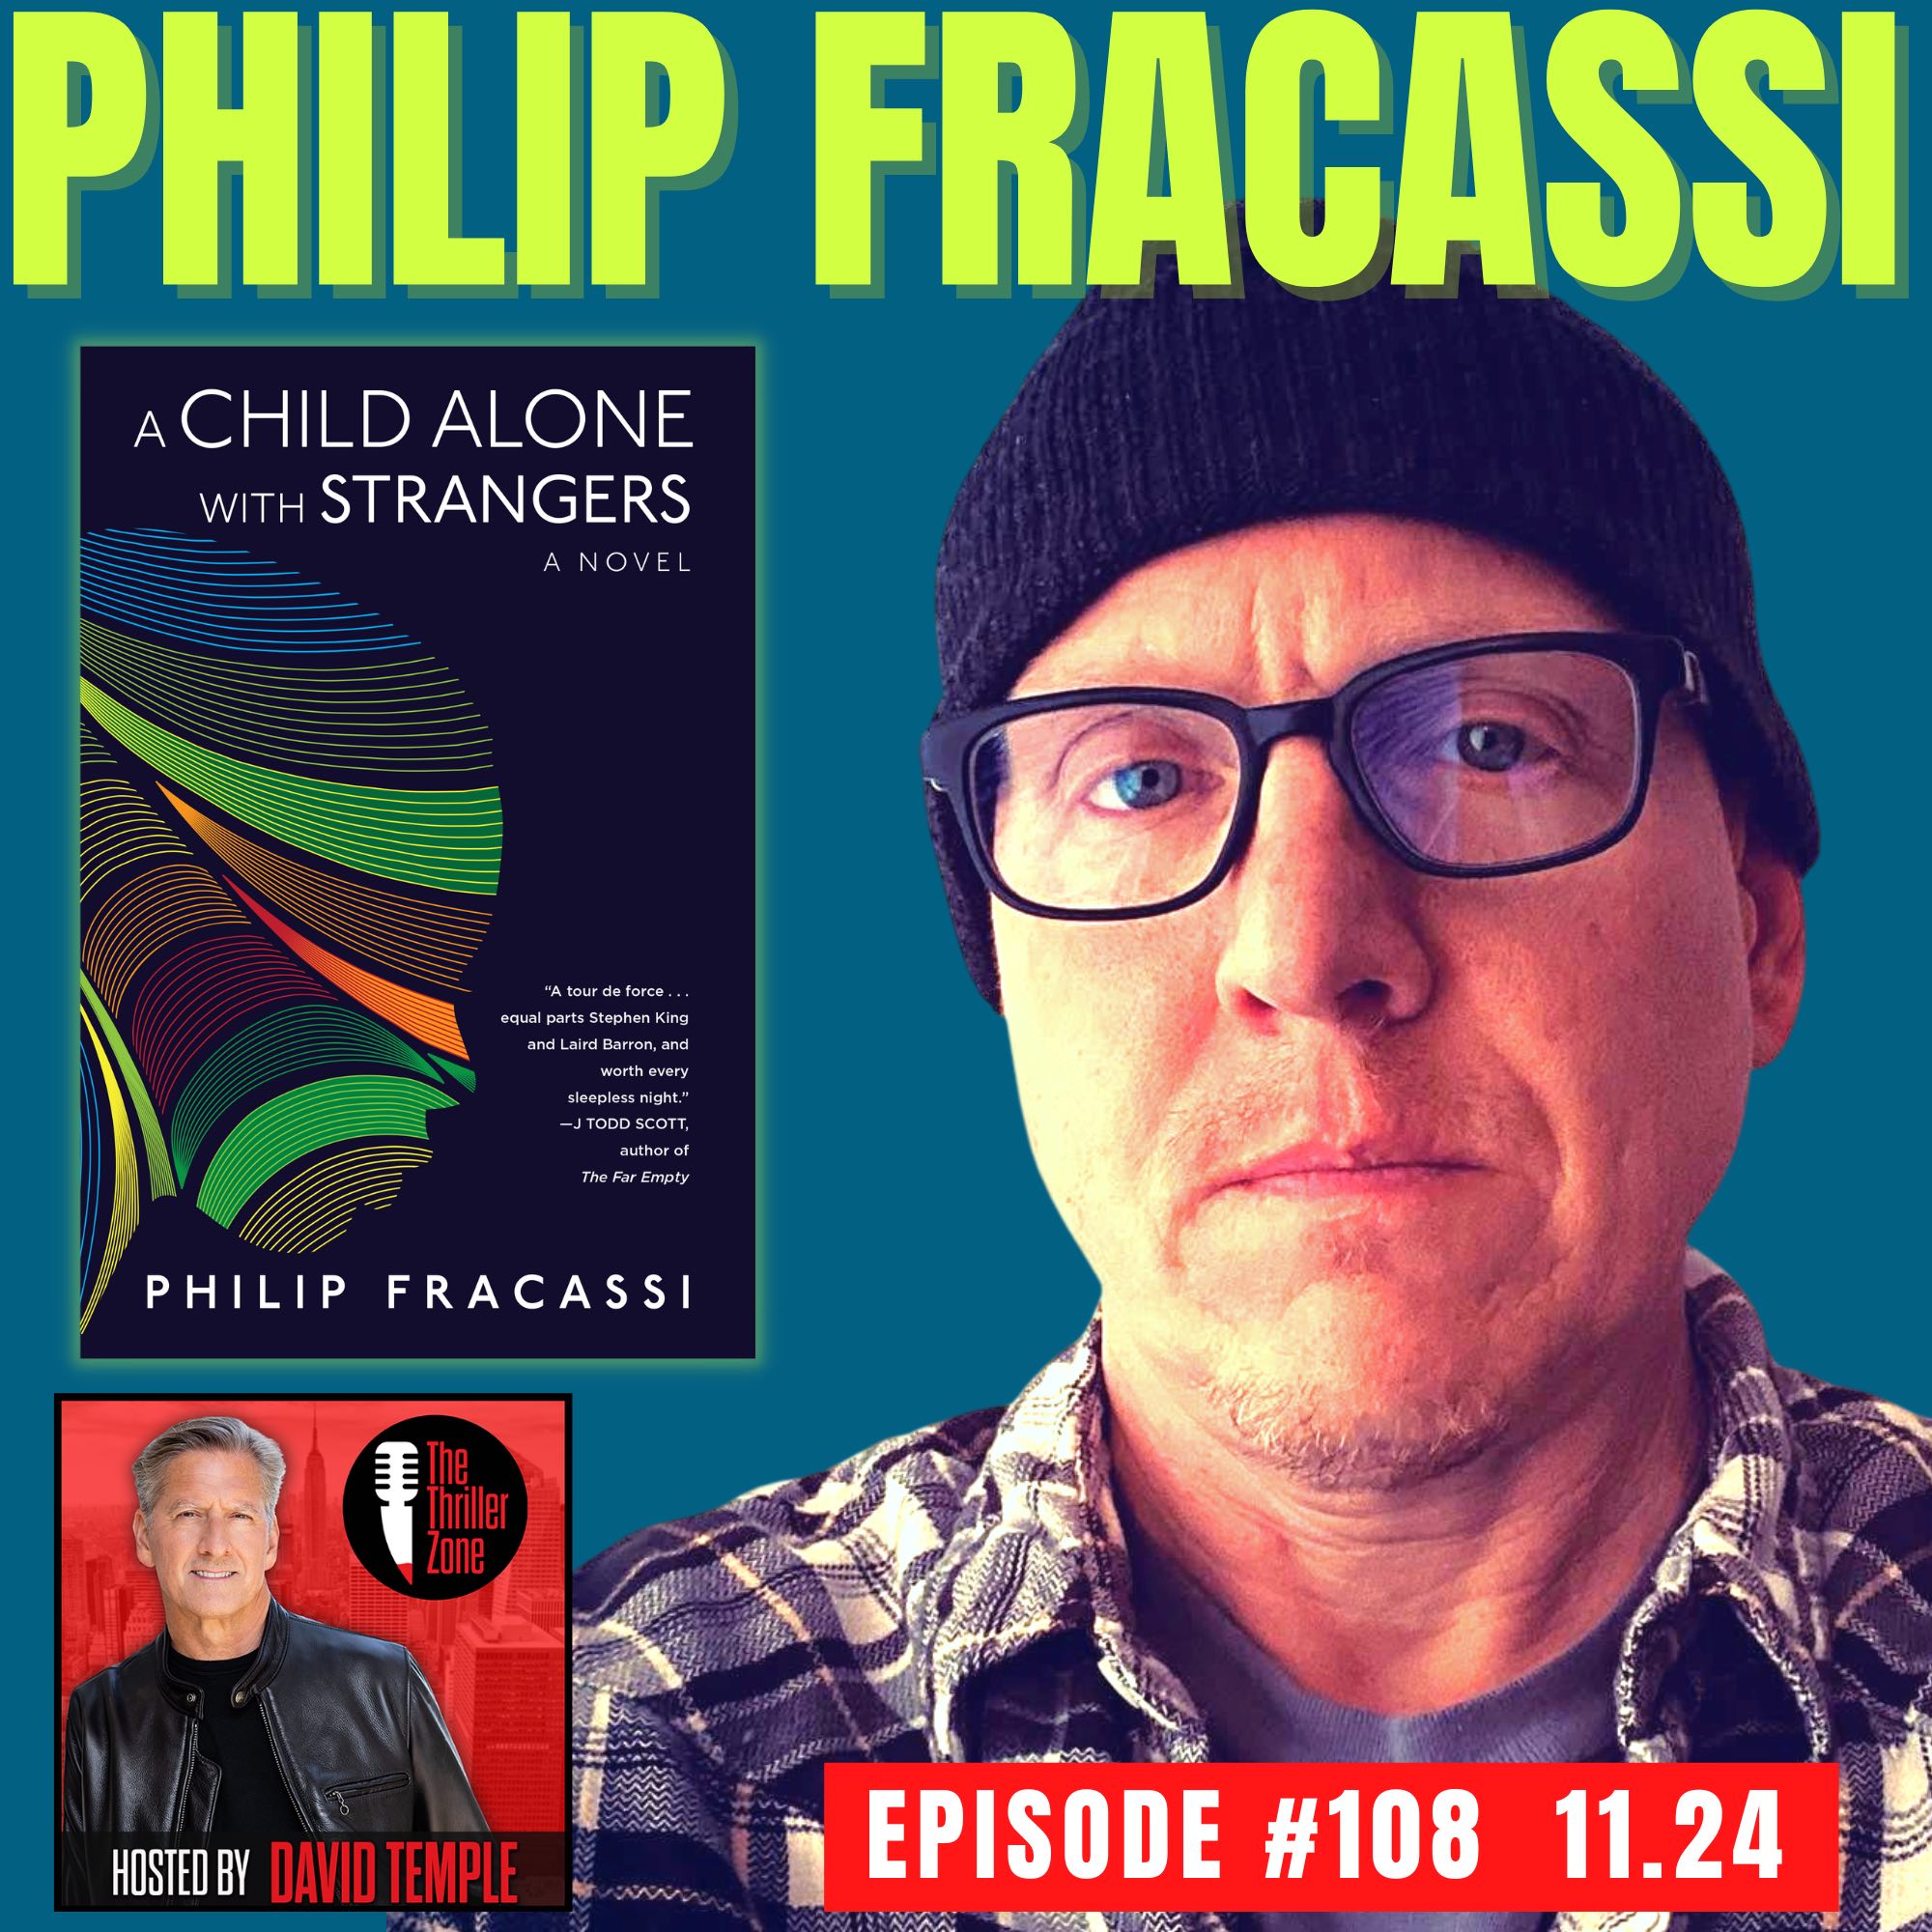 Philip Fracassi, author of A Child Alone With Strangers Image